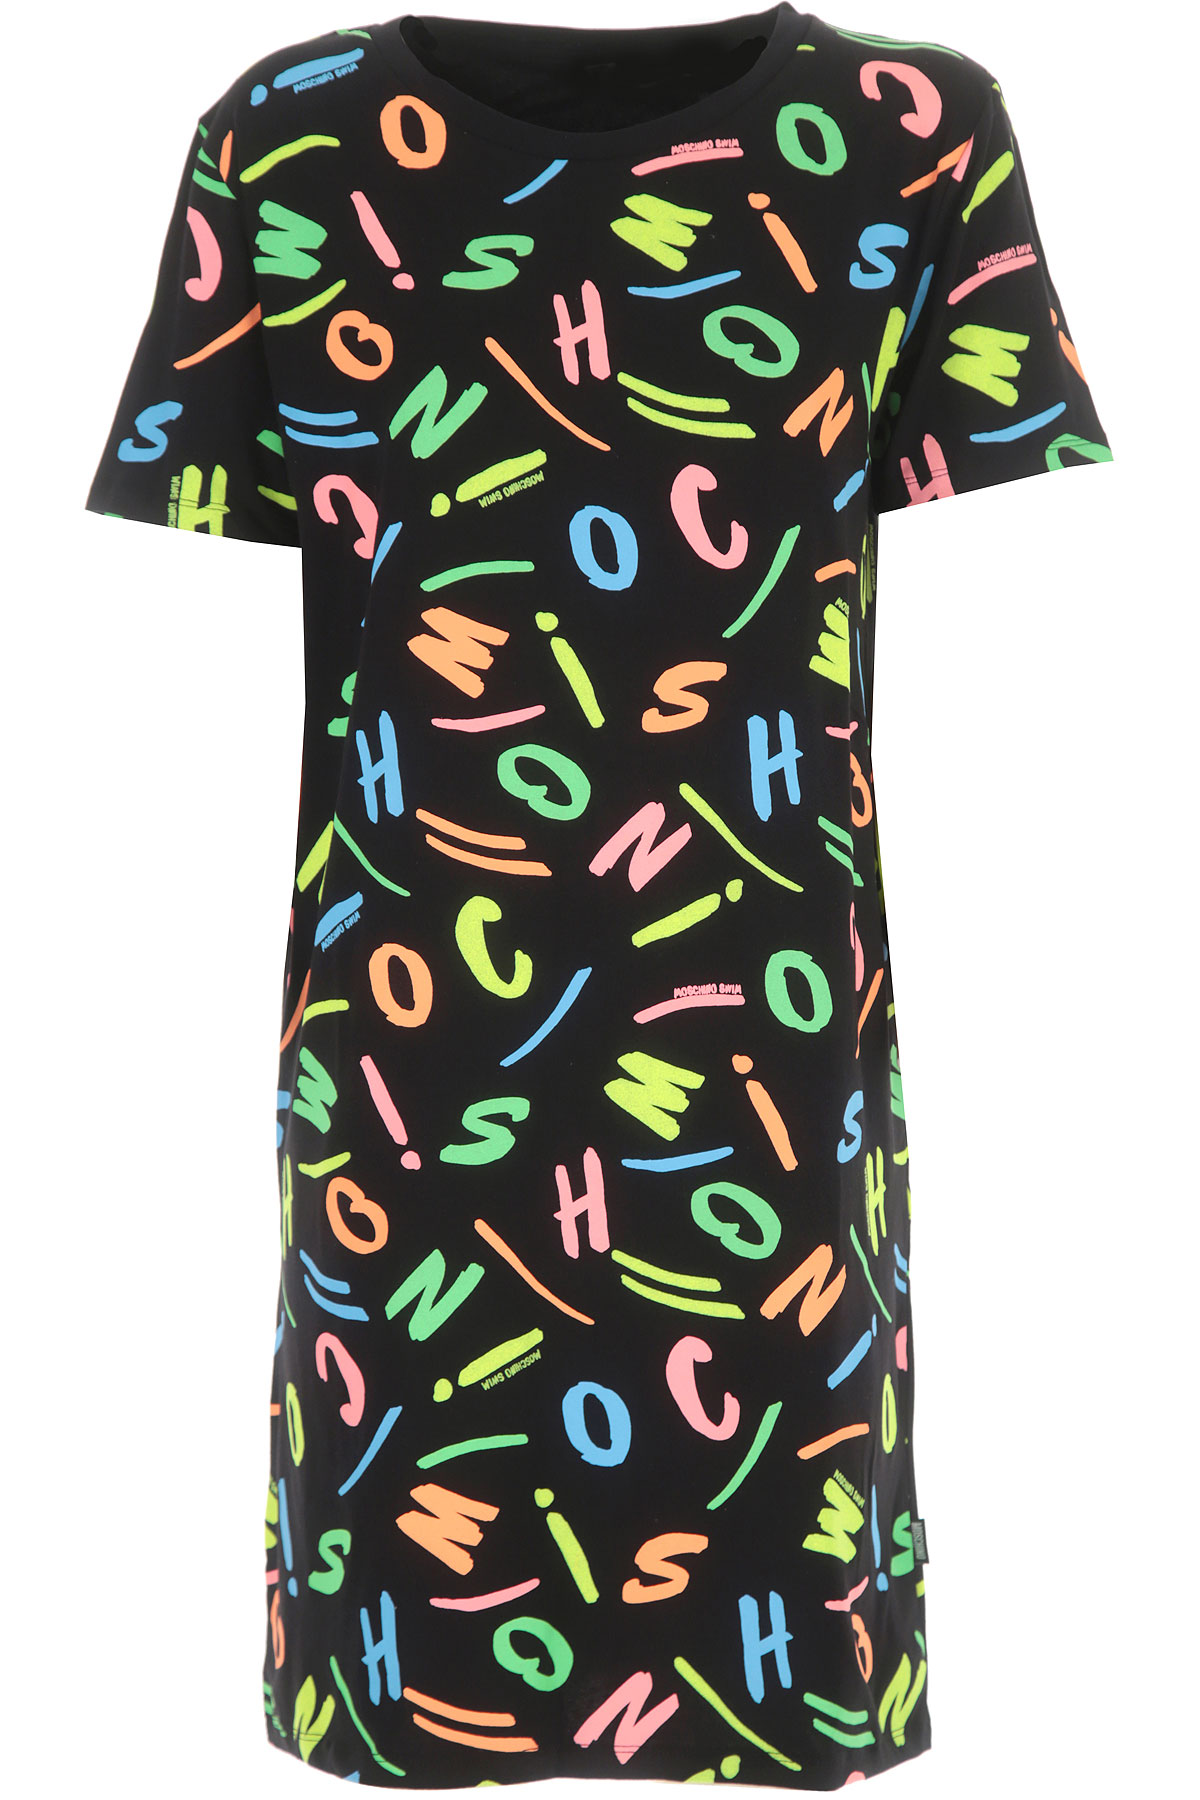 Womens Clothing Moschino, Style code: a1917-2138-5888